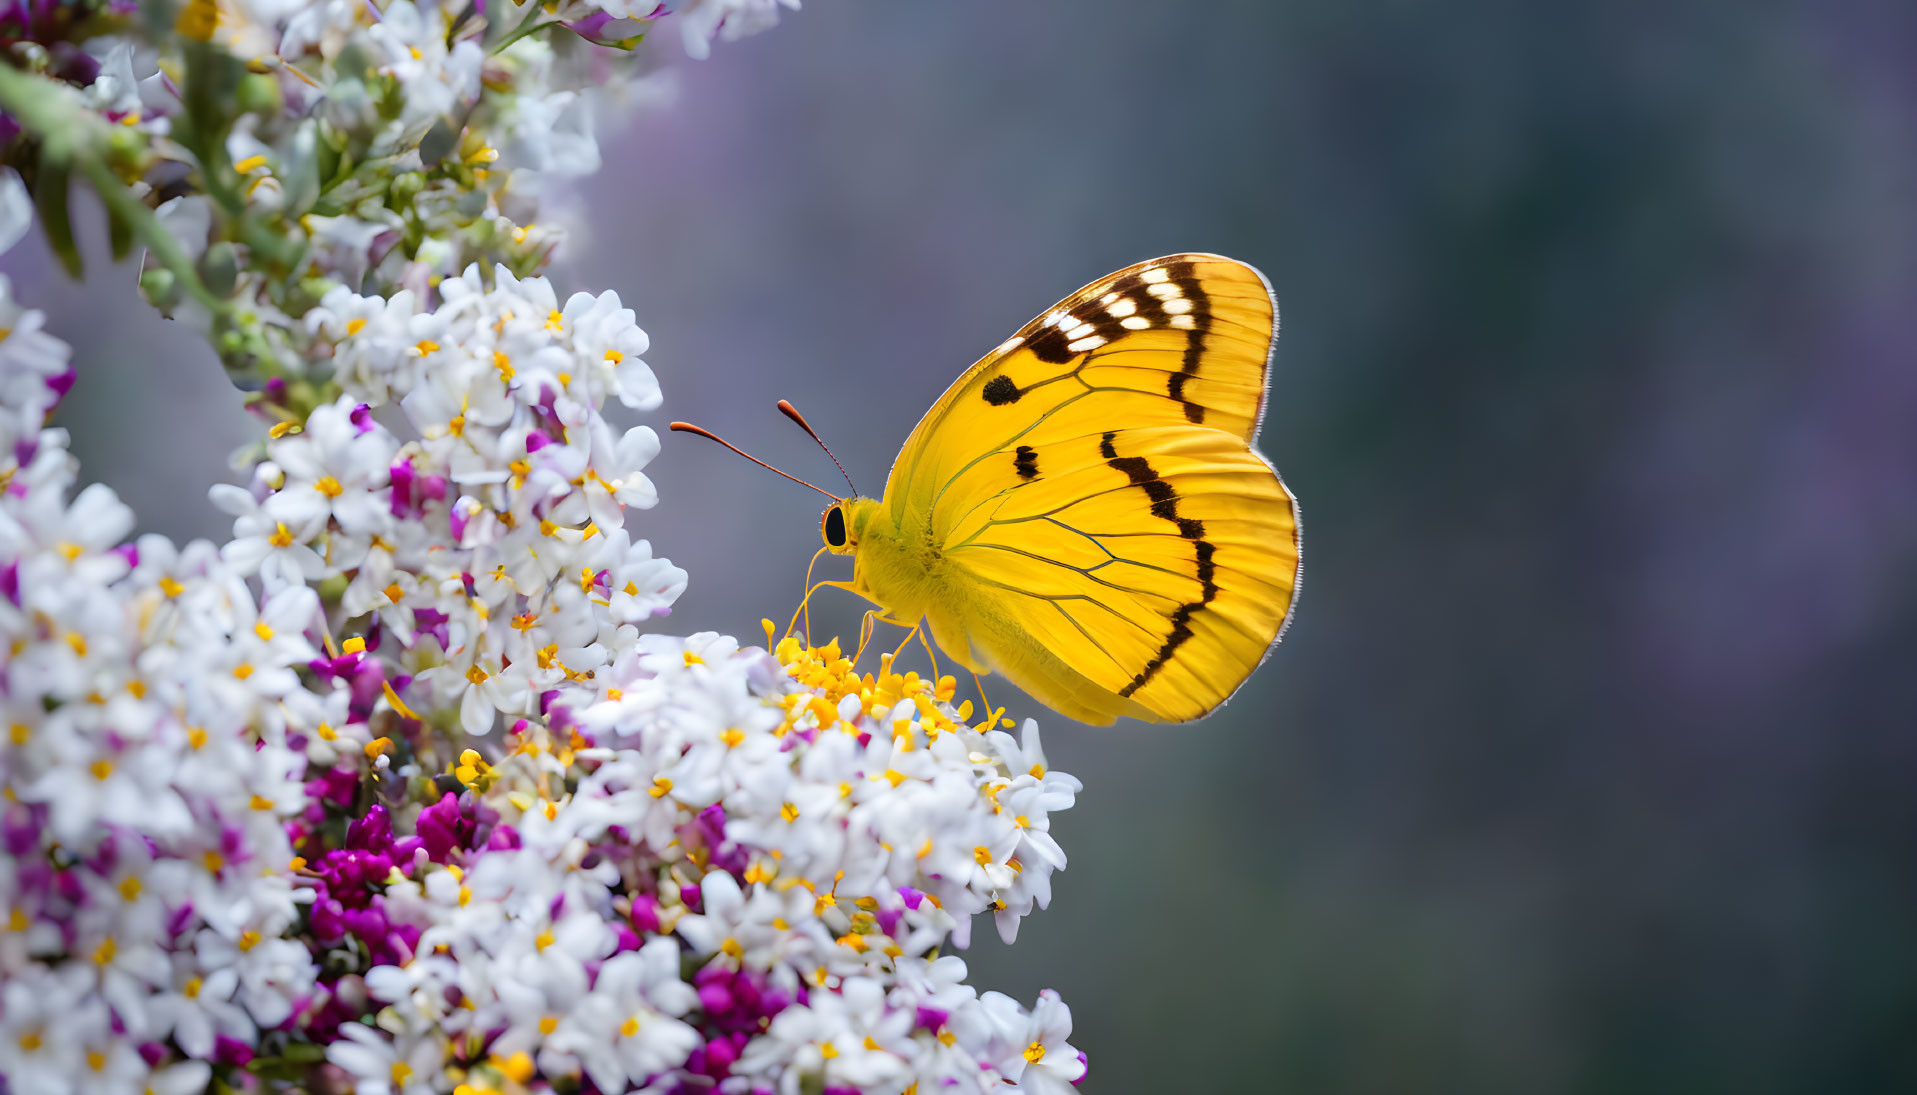 Yellow Butterfly Resting on White and Purple Flowers in Soft Purple Background